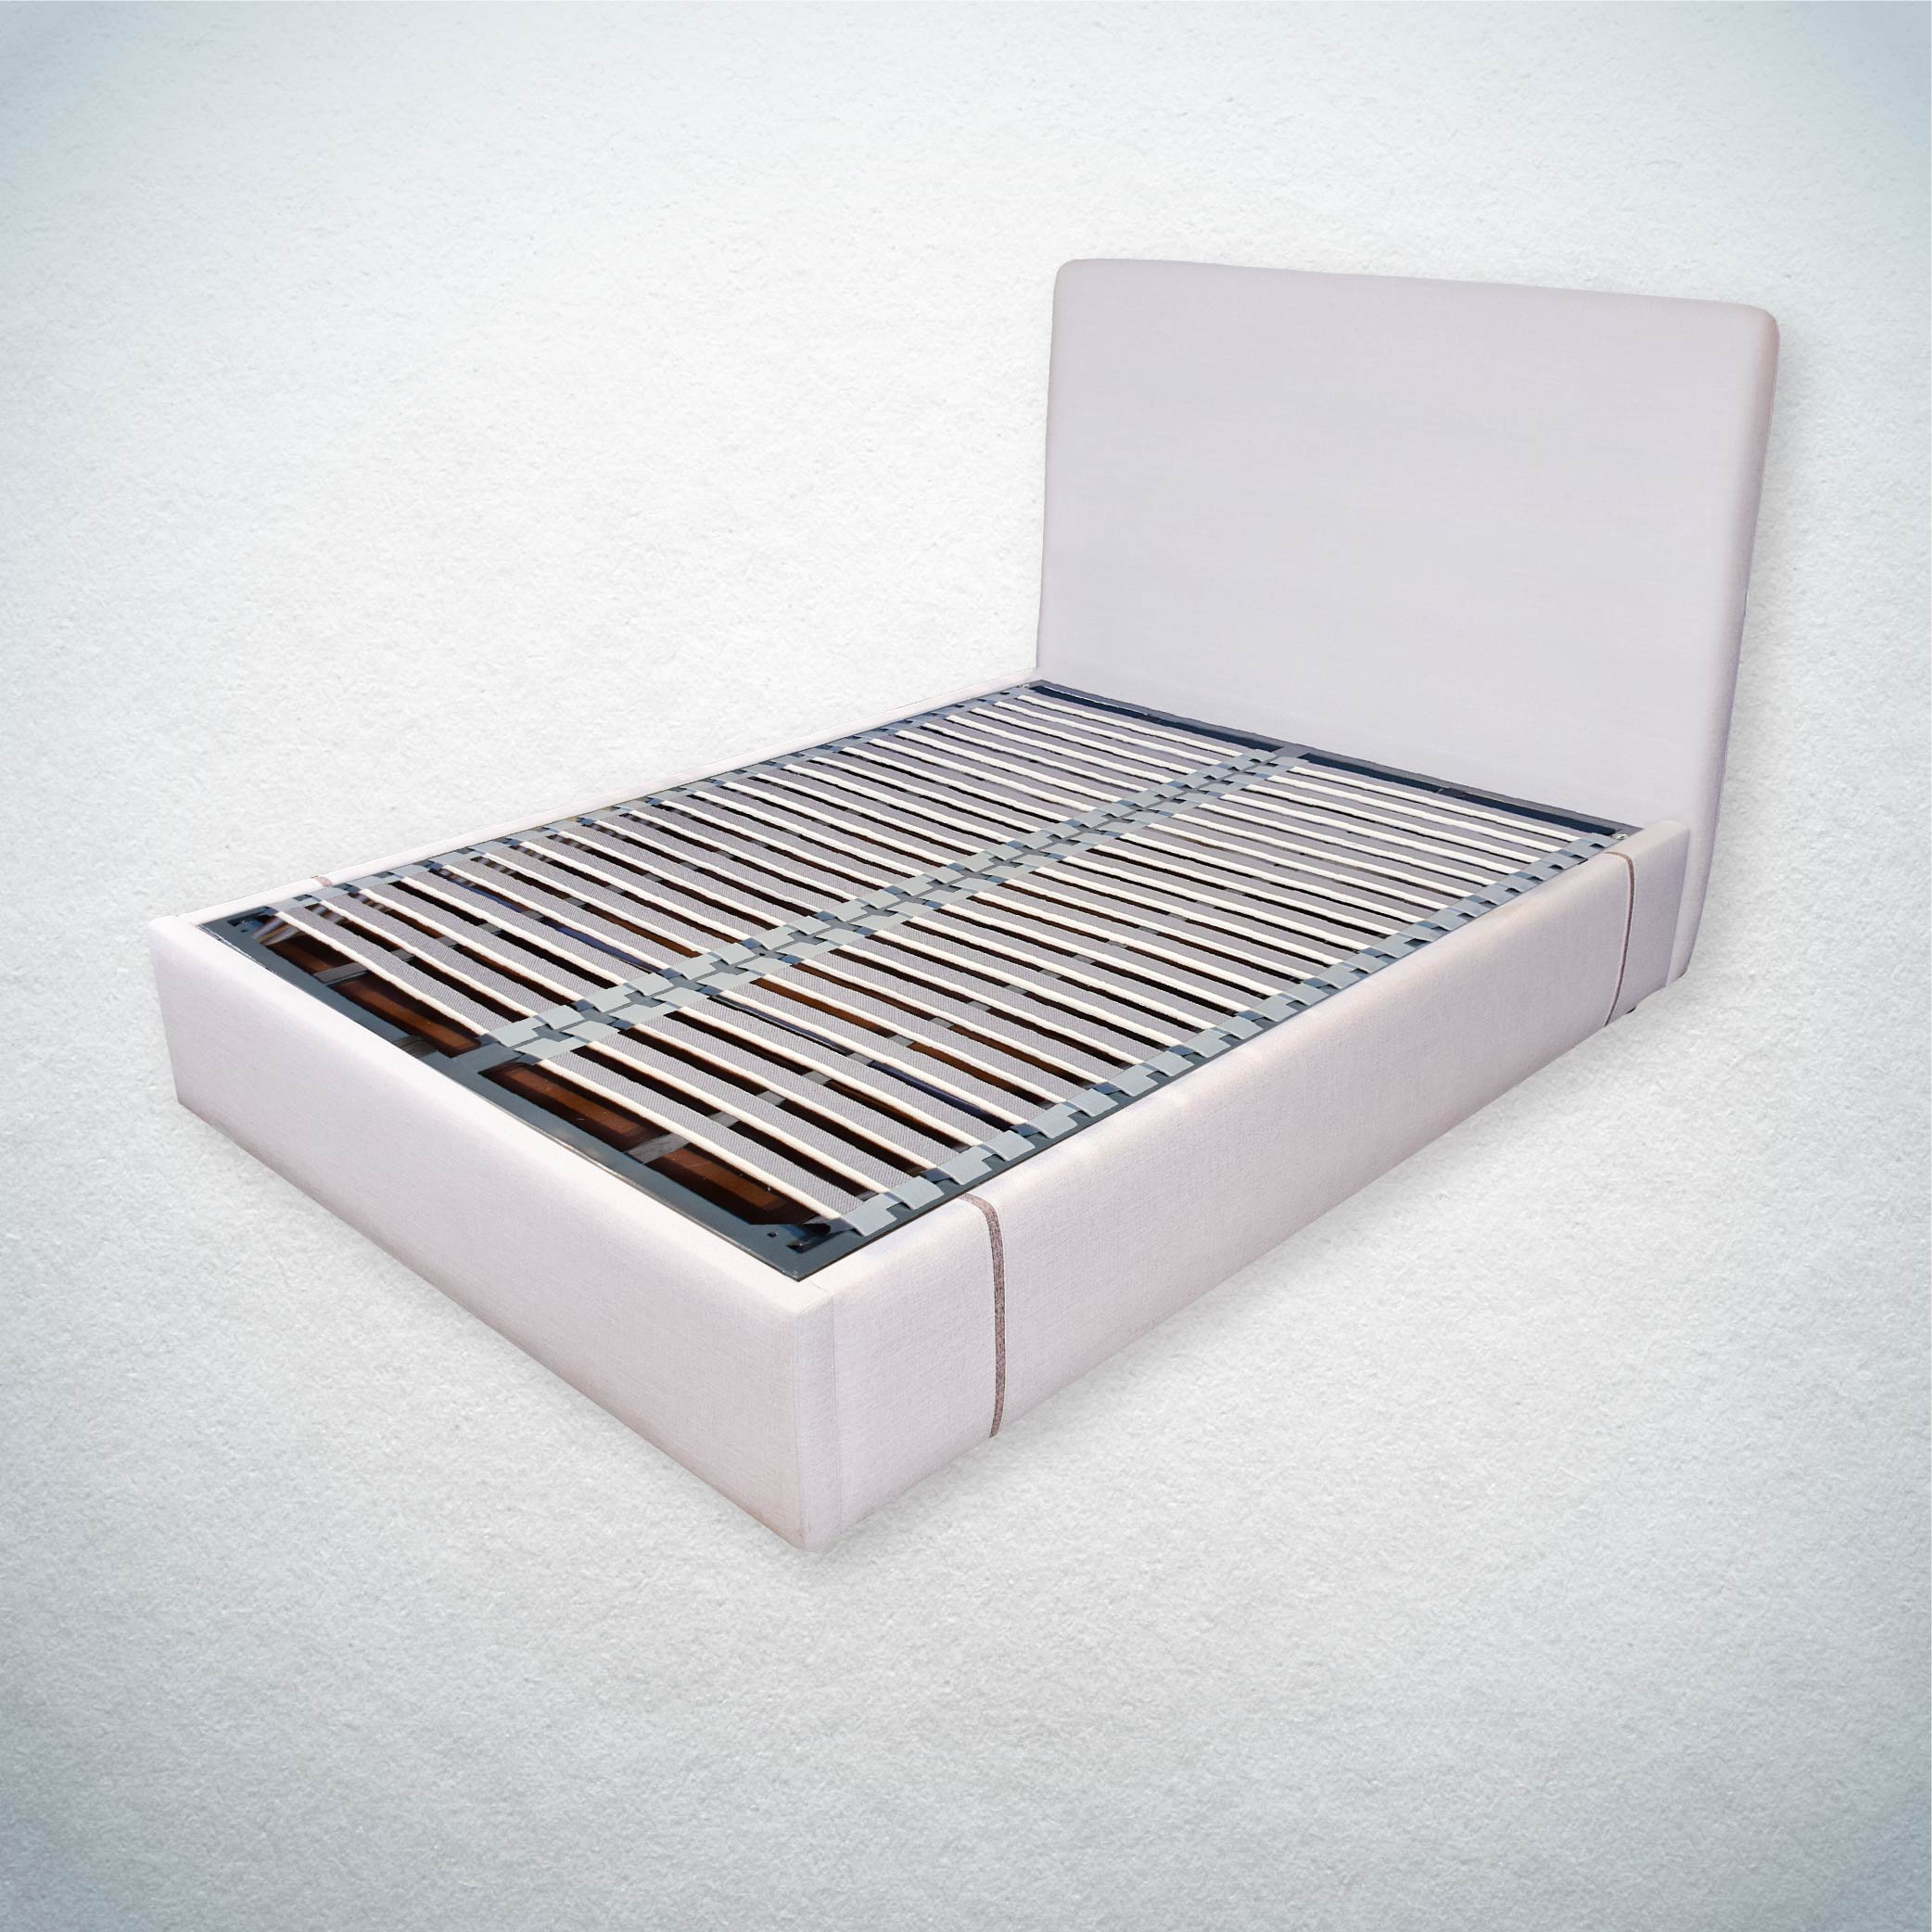 Hydraulic Storage with Slats Bed Frame - Excellence